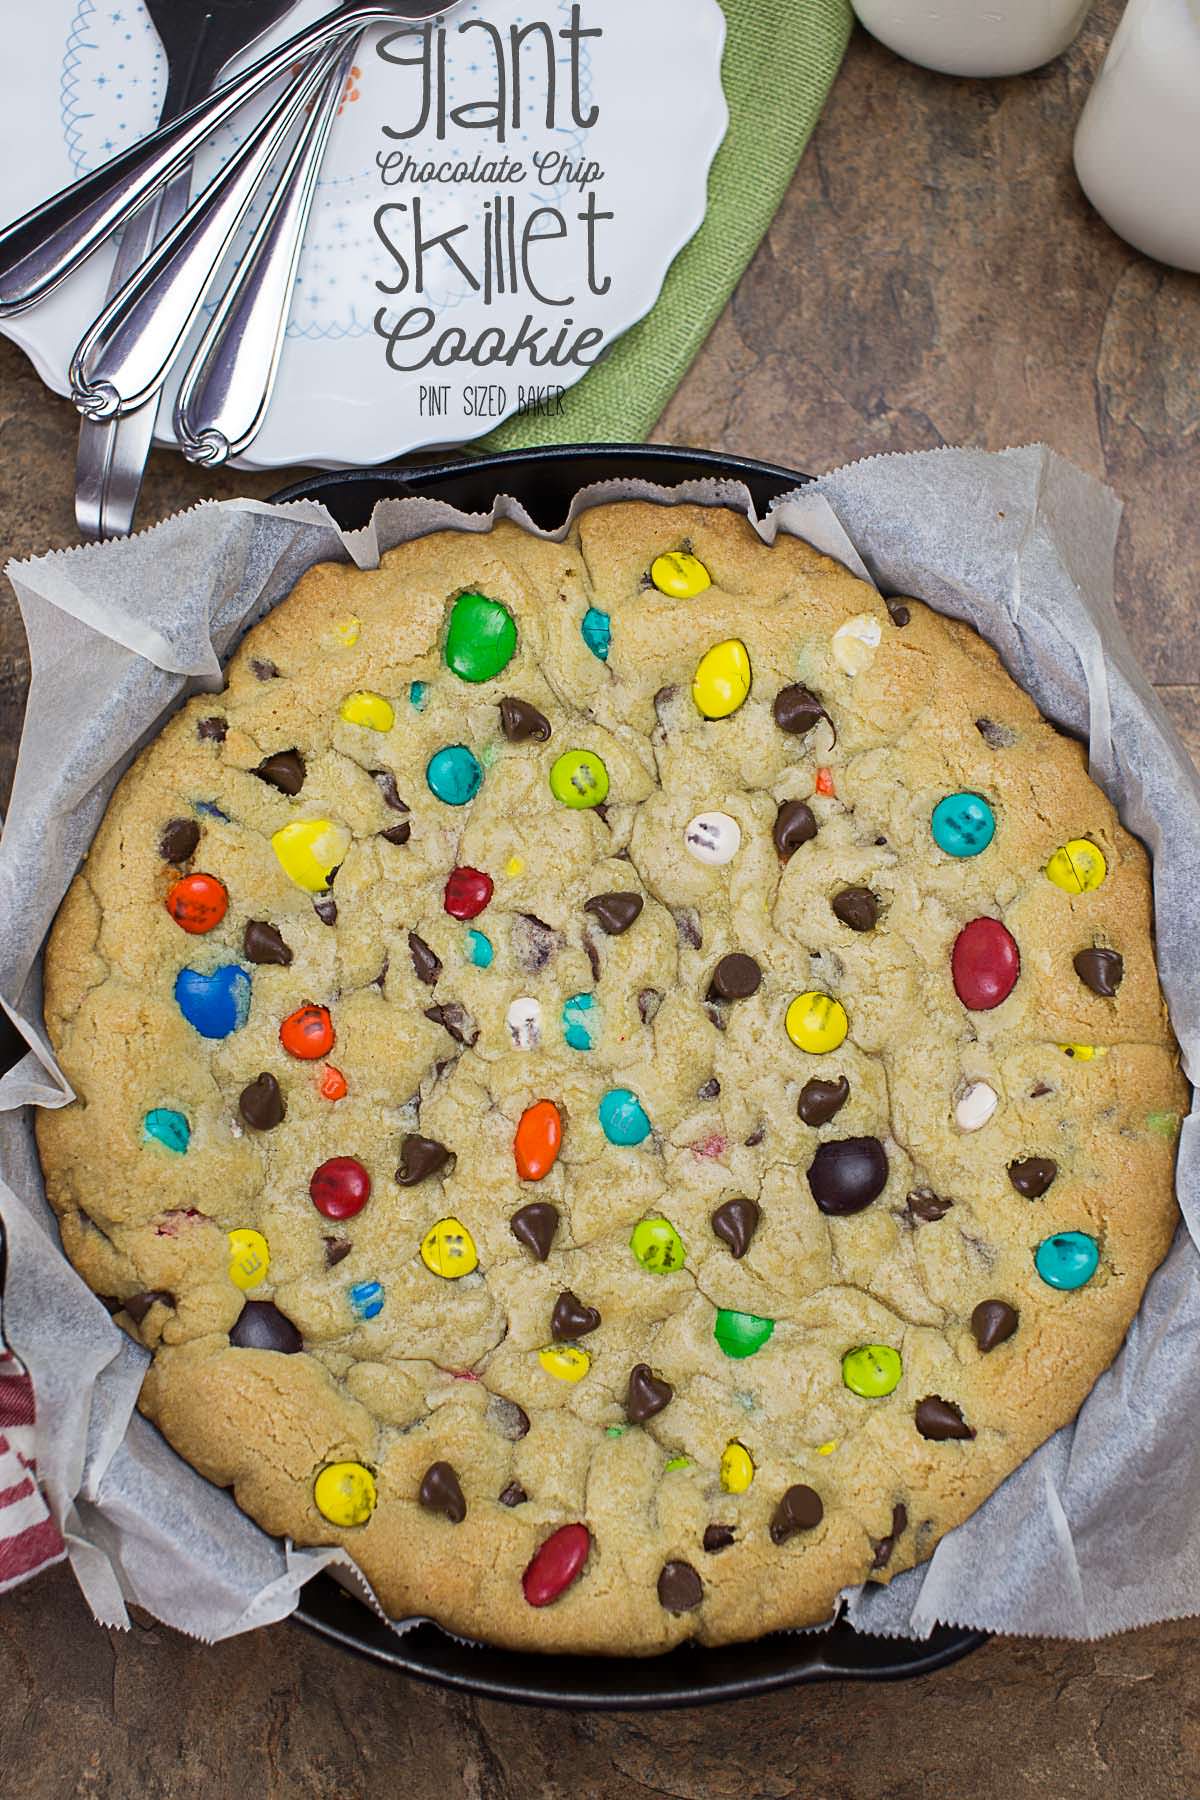 Because who doesn't want a giant chocolate chip skillet cookie loaded with M&M's??